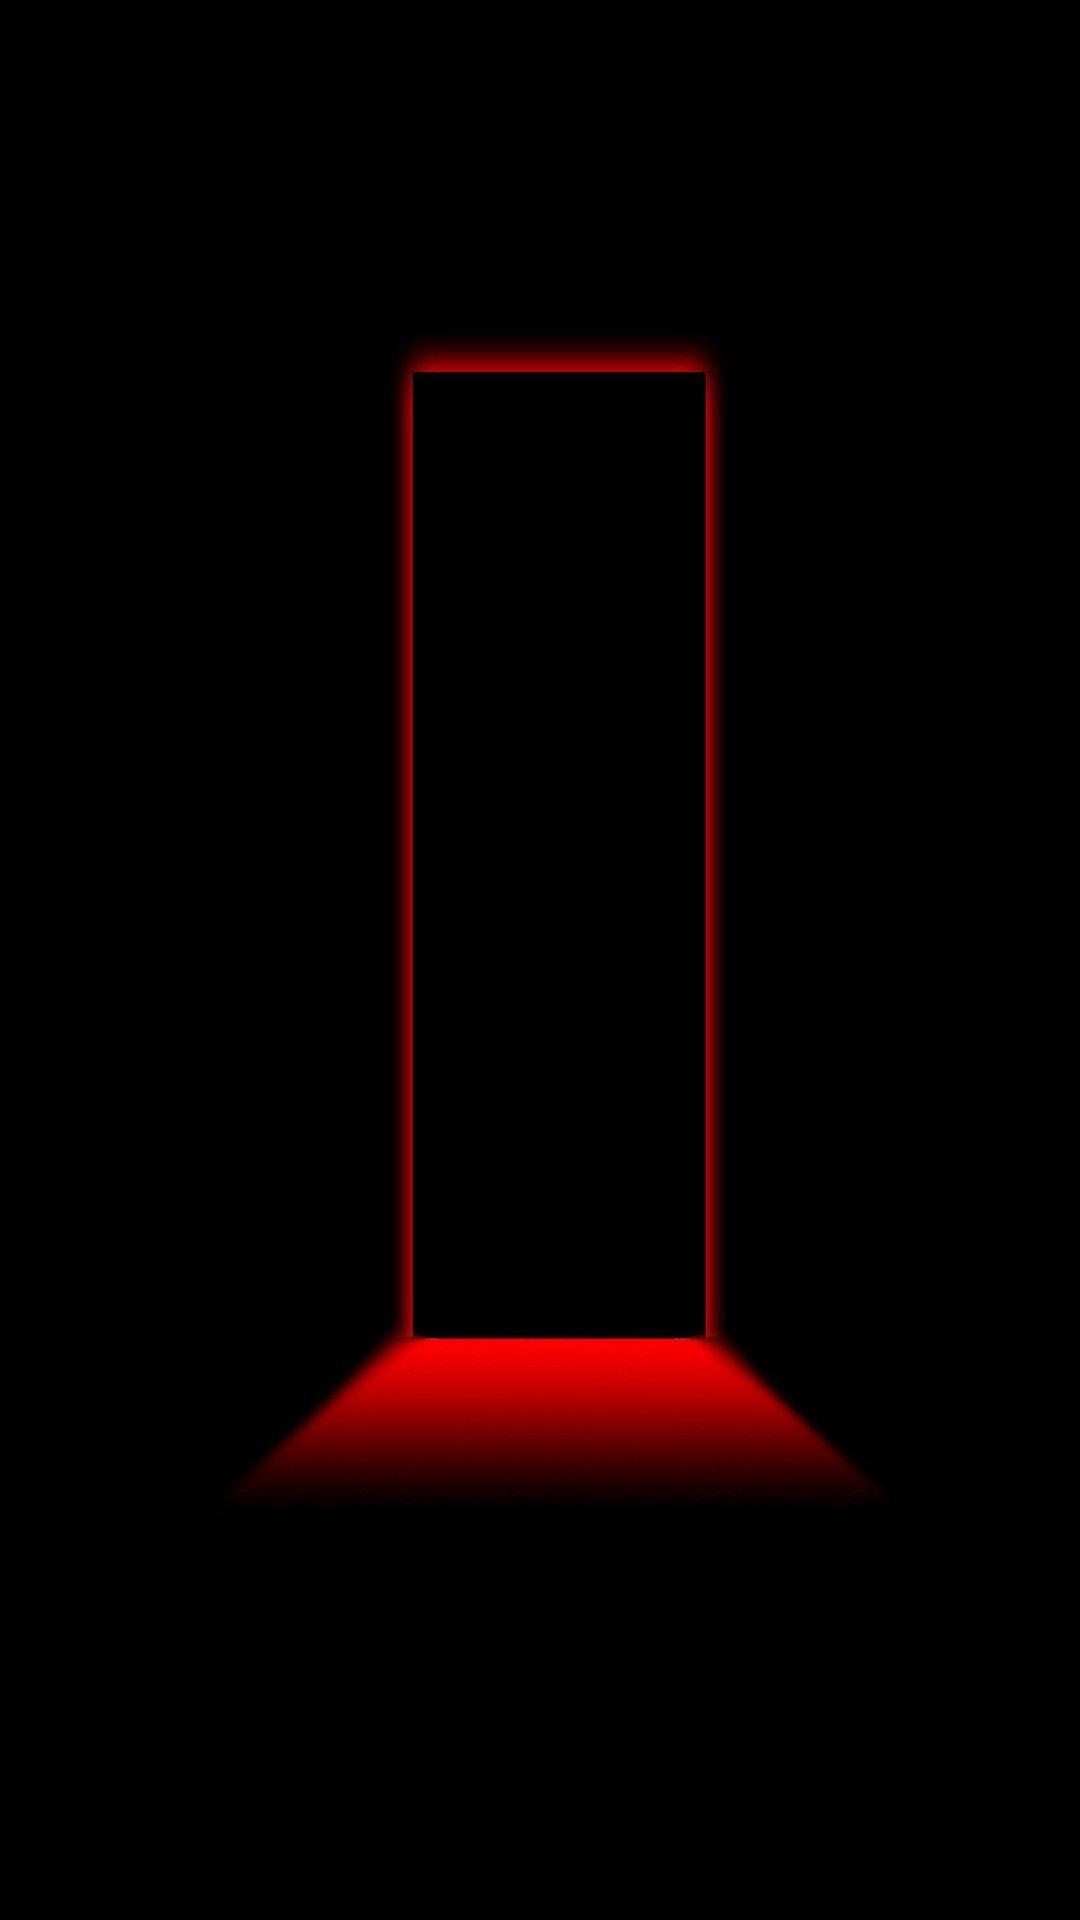 3D Black and Red iPhone Wallpapers